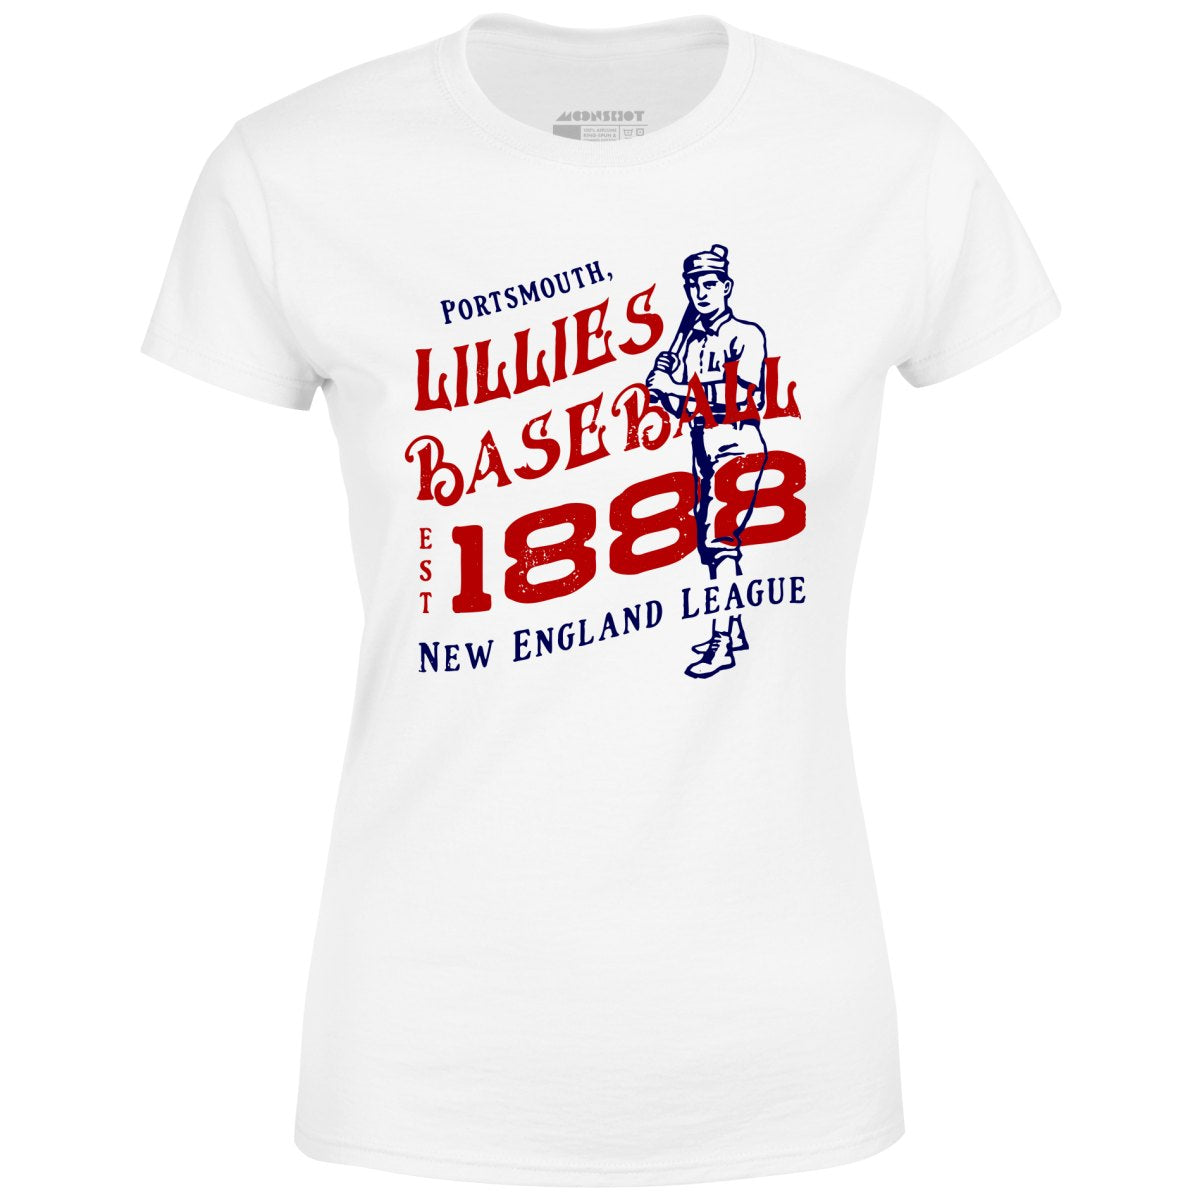 Portsmouth Lillies - New Hampshire - Vintage Defunct Baseball Teams - Women's T-Shirt